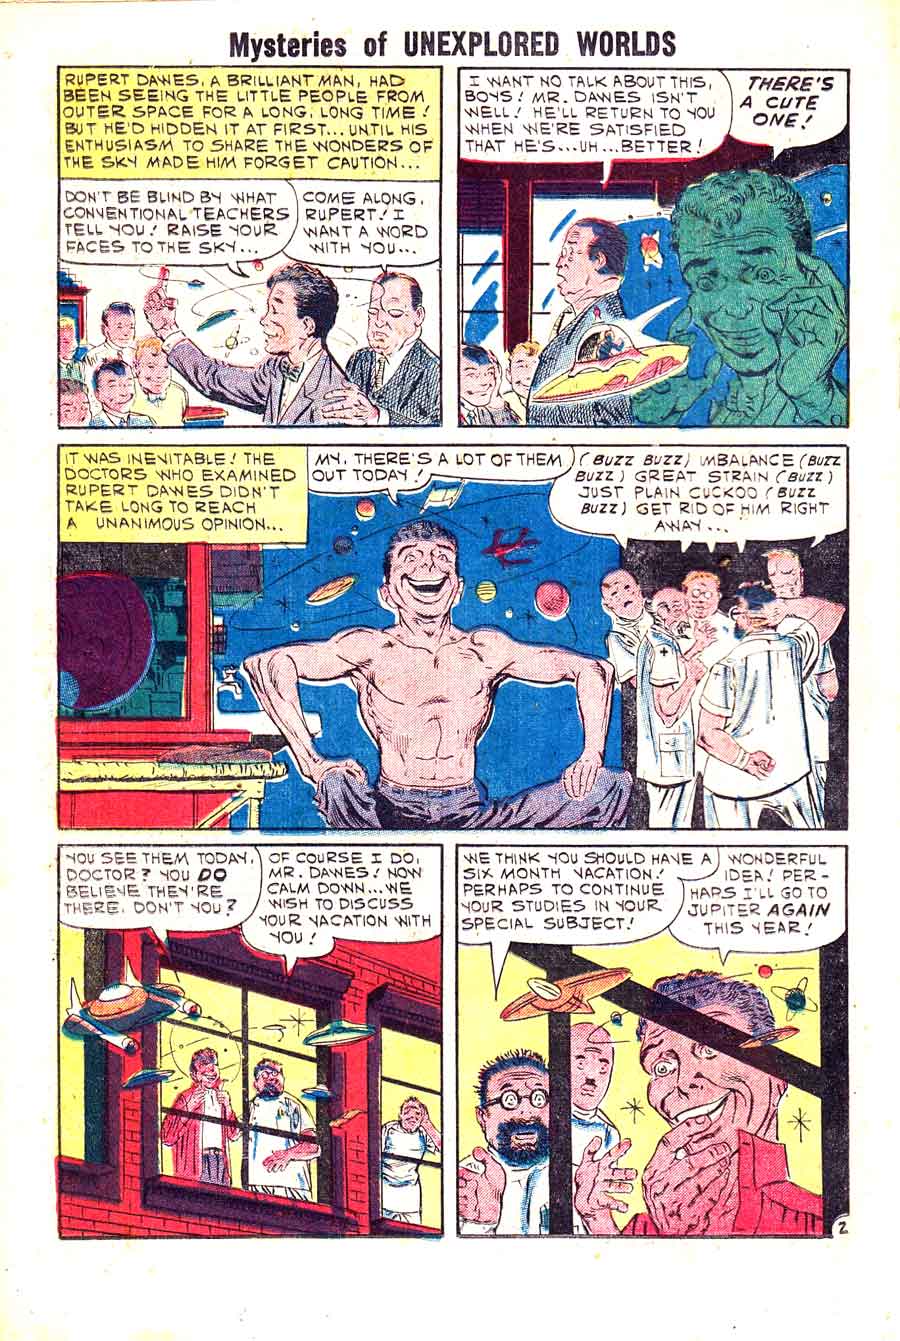 Mysteries of Unexplored Worlds v1 #22 charlton comic book page art by Steve Ditko